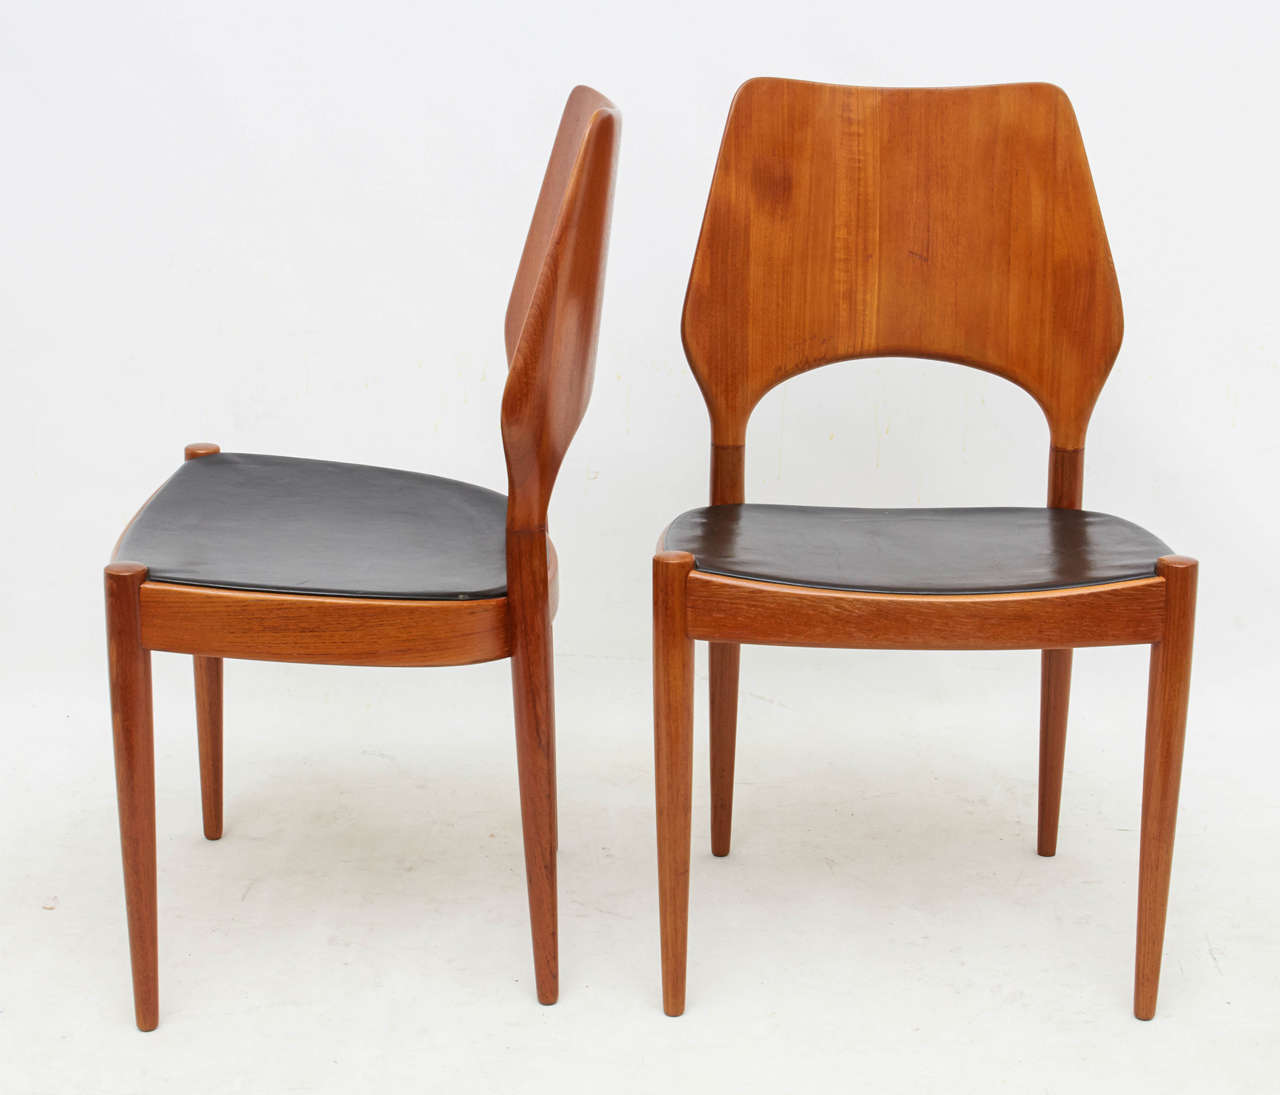 Beautiful and rare set of six dining chairs with original leather seat covers. Remarkably sculpted solid teak backs and legs. Please contact for location.